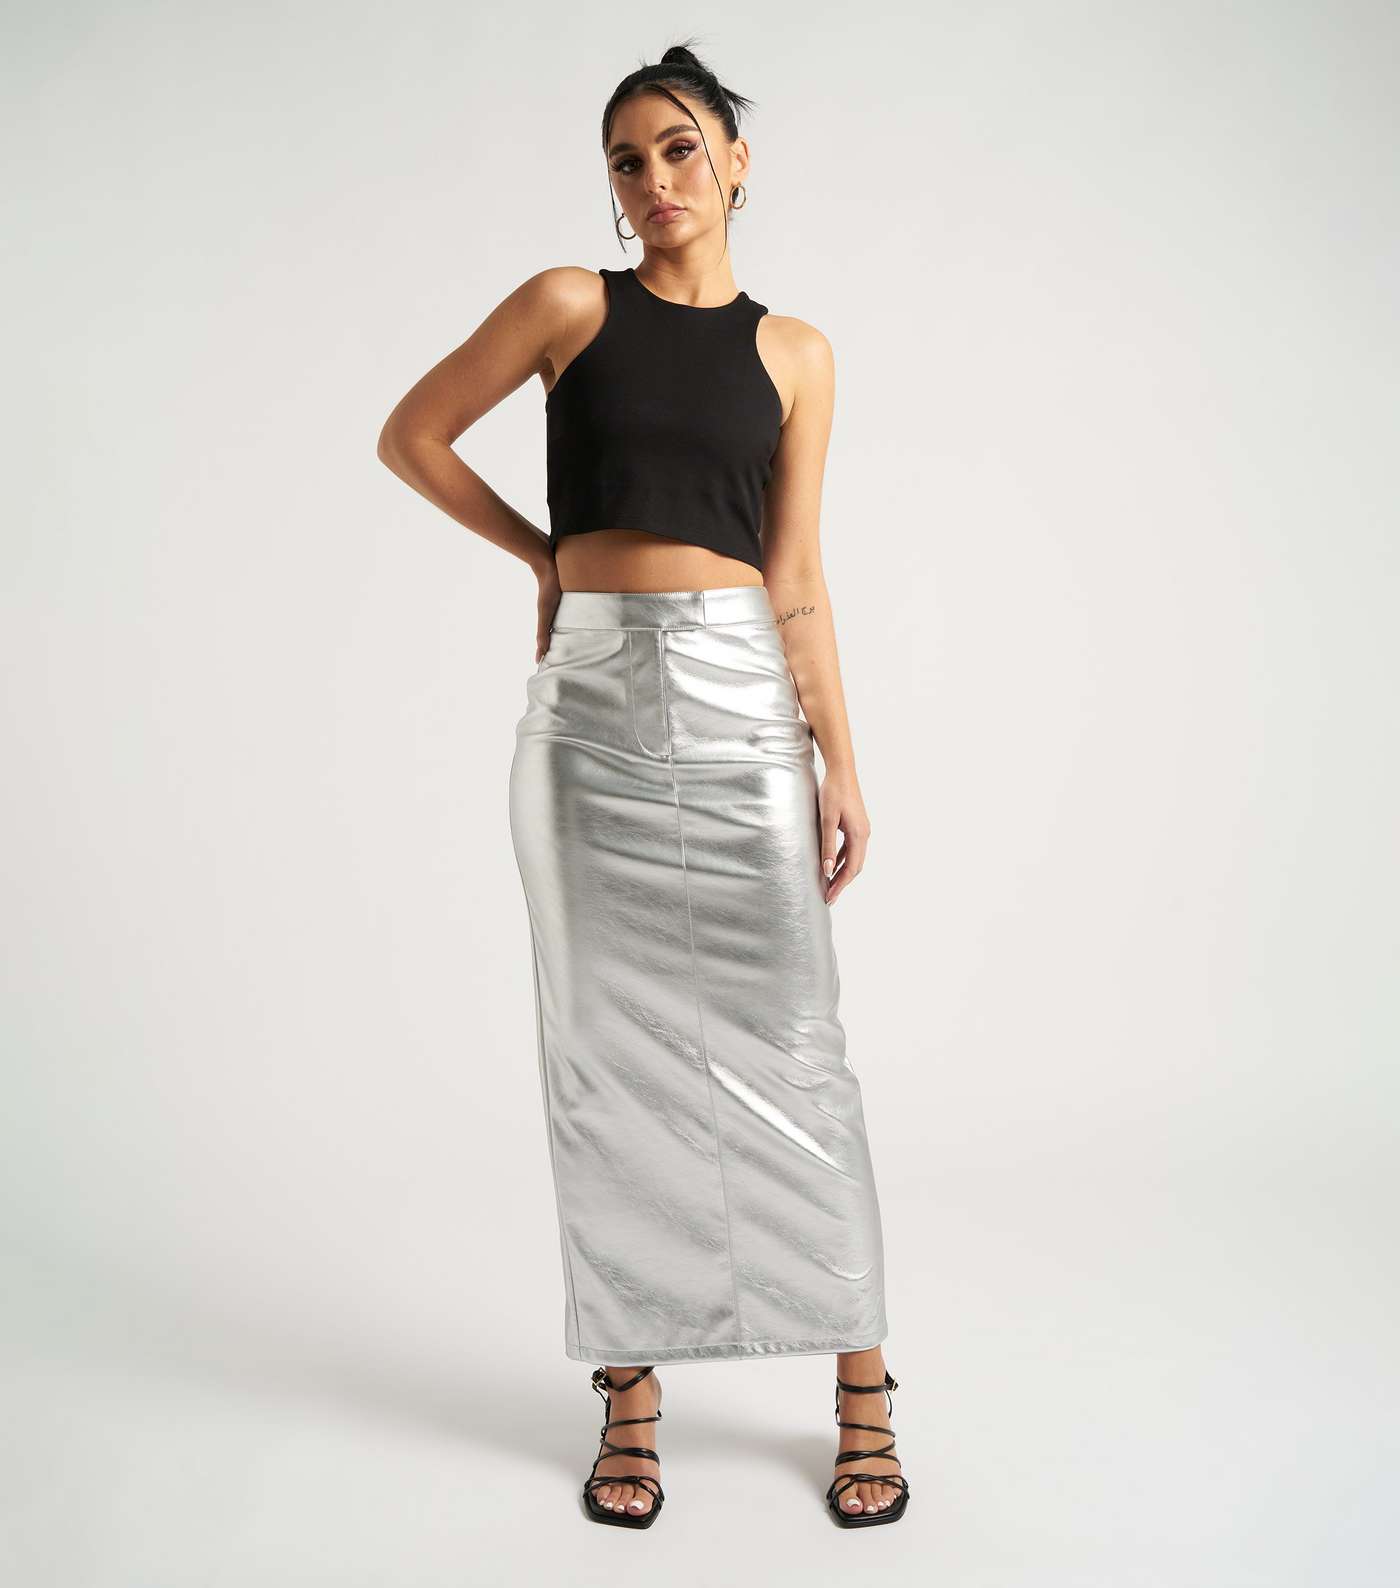 Urban Bliss Silver Leather-Look Maxi Skirt Image 2